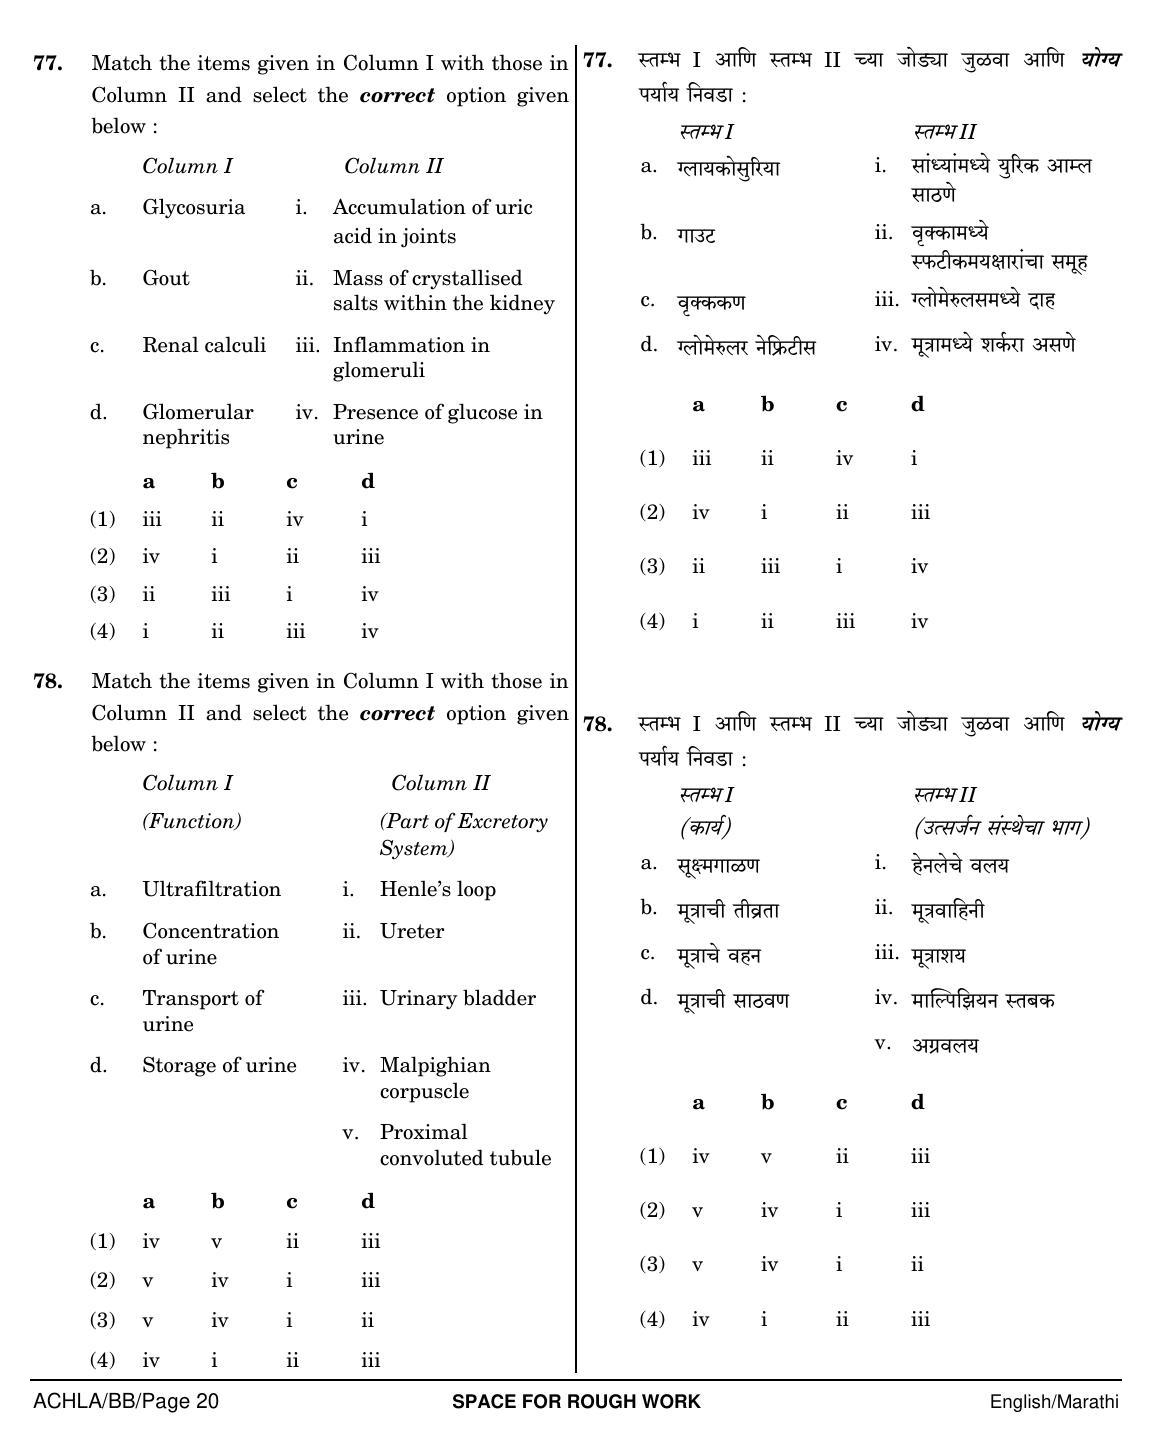 NEET Marathi BB 2018 Question Paper - Page 20